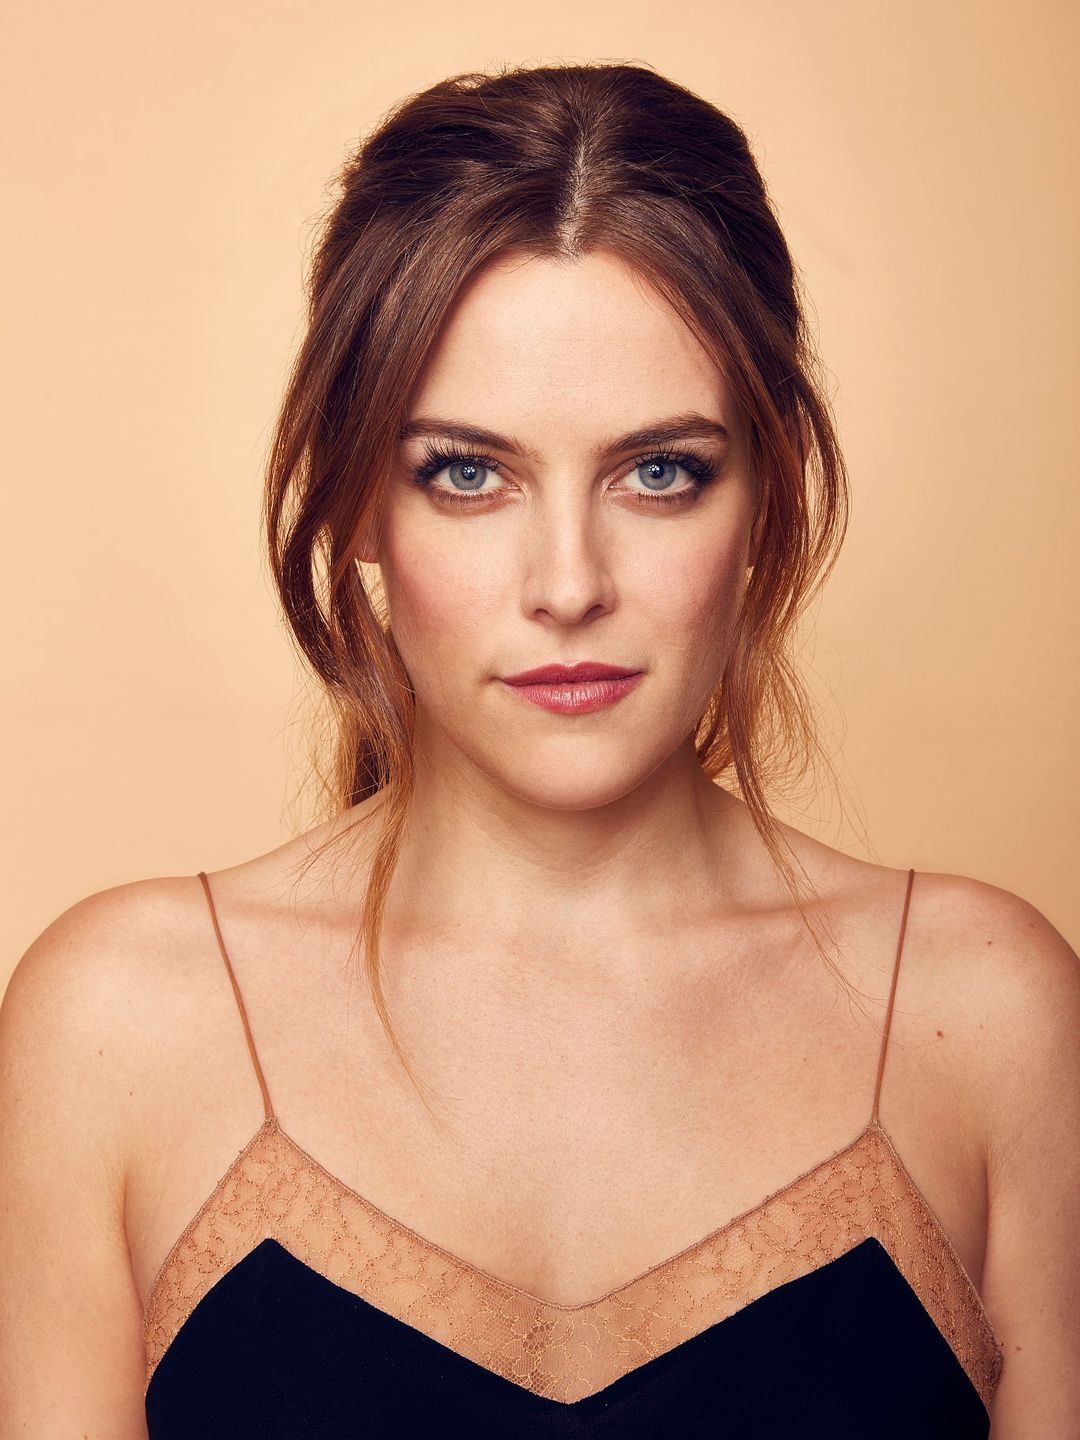 Riley Keough early life